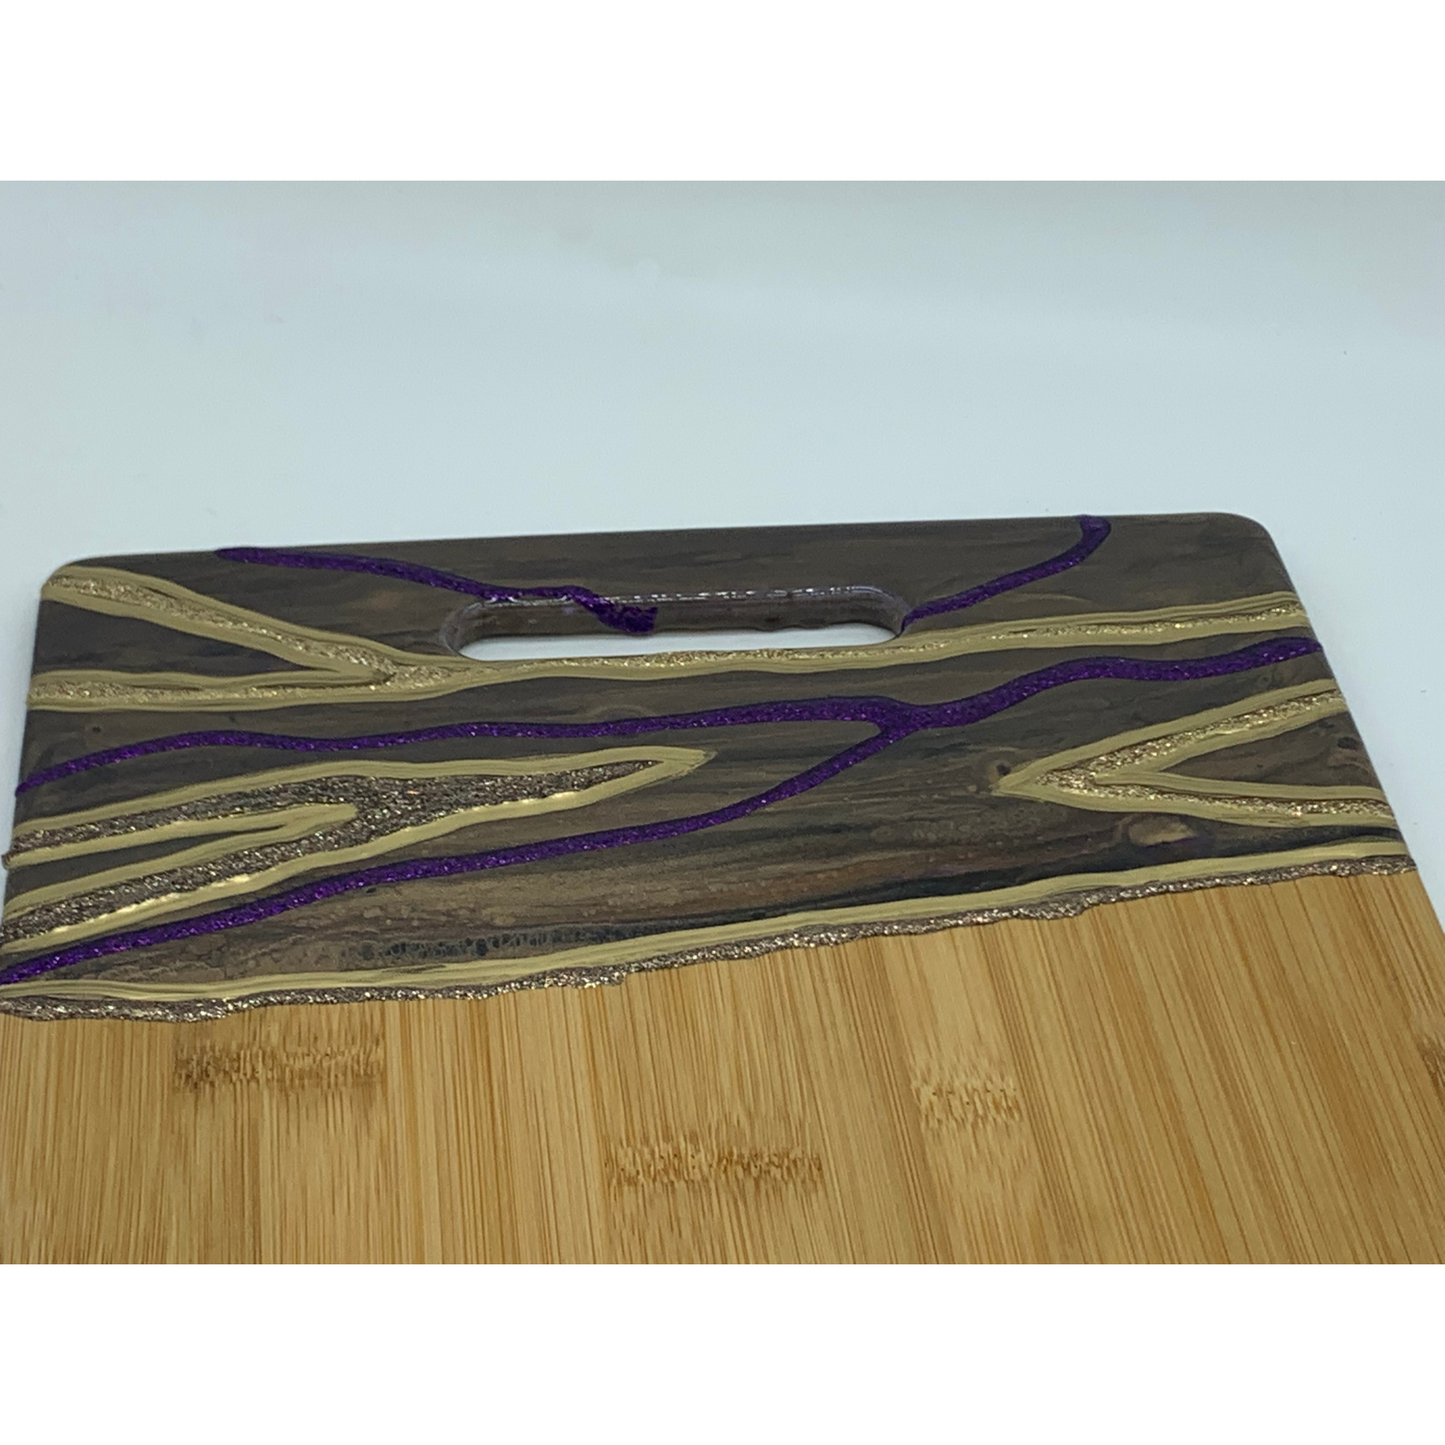 "Show Stopper" Gorgeous Functional Art Charcuterie Board/ Cutting Board